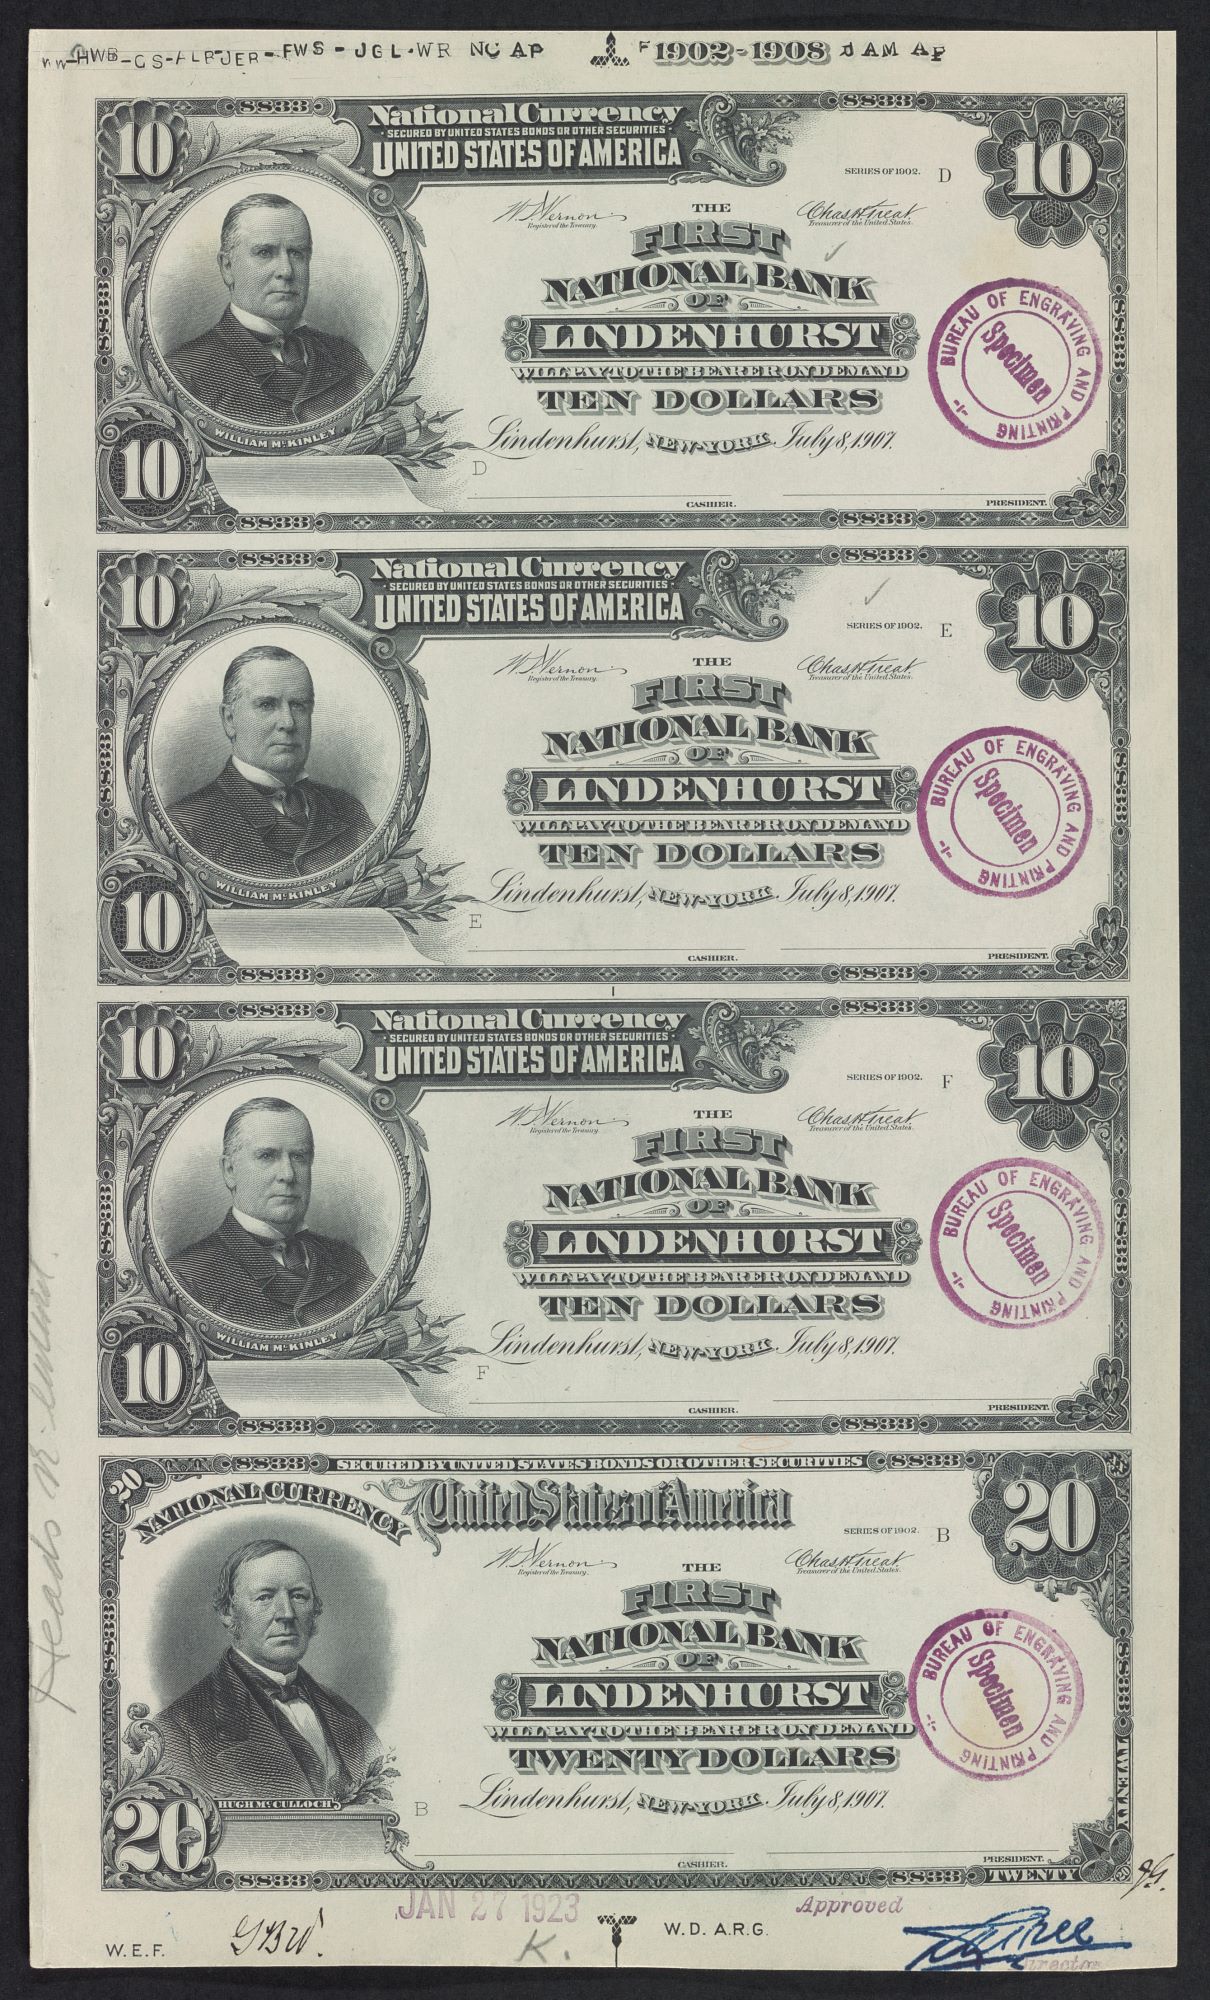 $10 banknotes issued by 1st National Bank of Lindenhurst